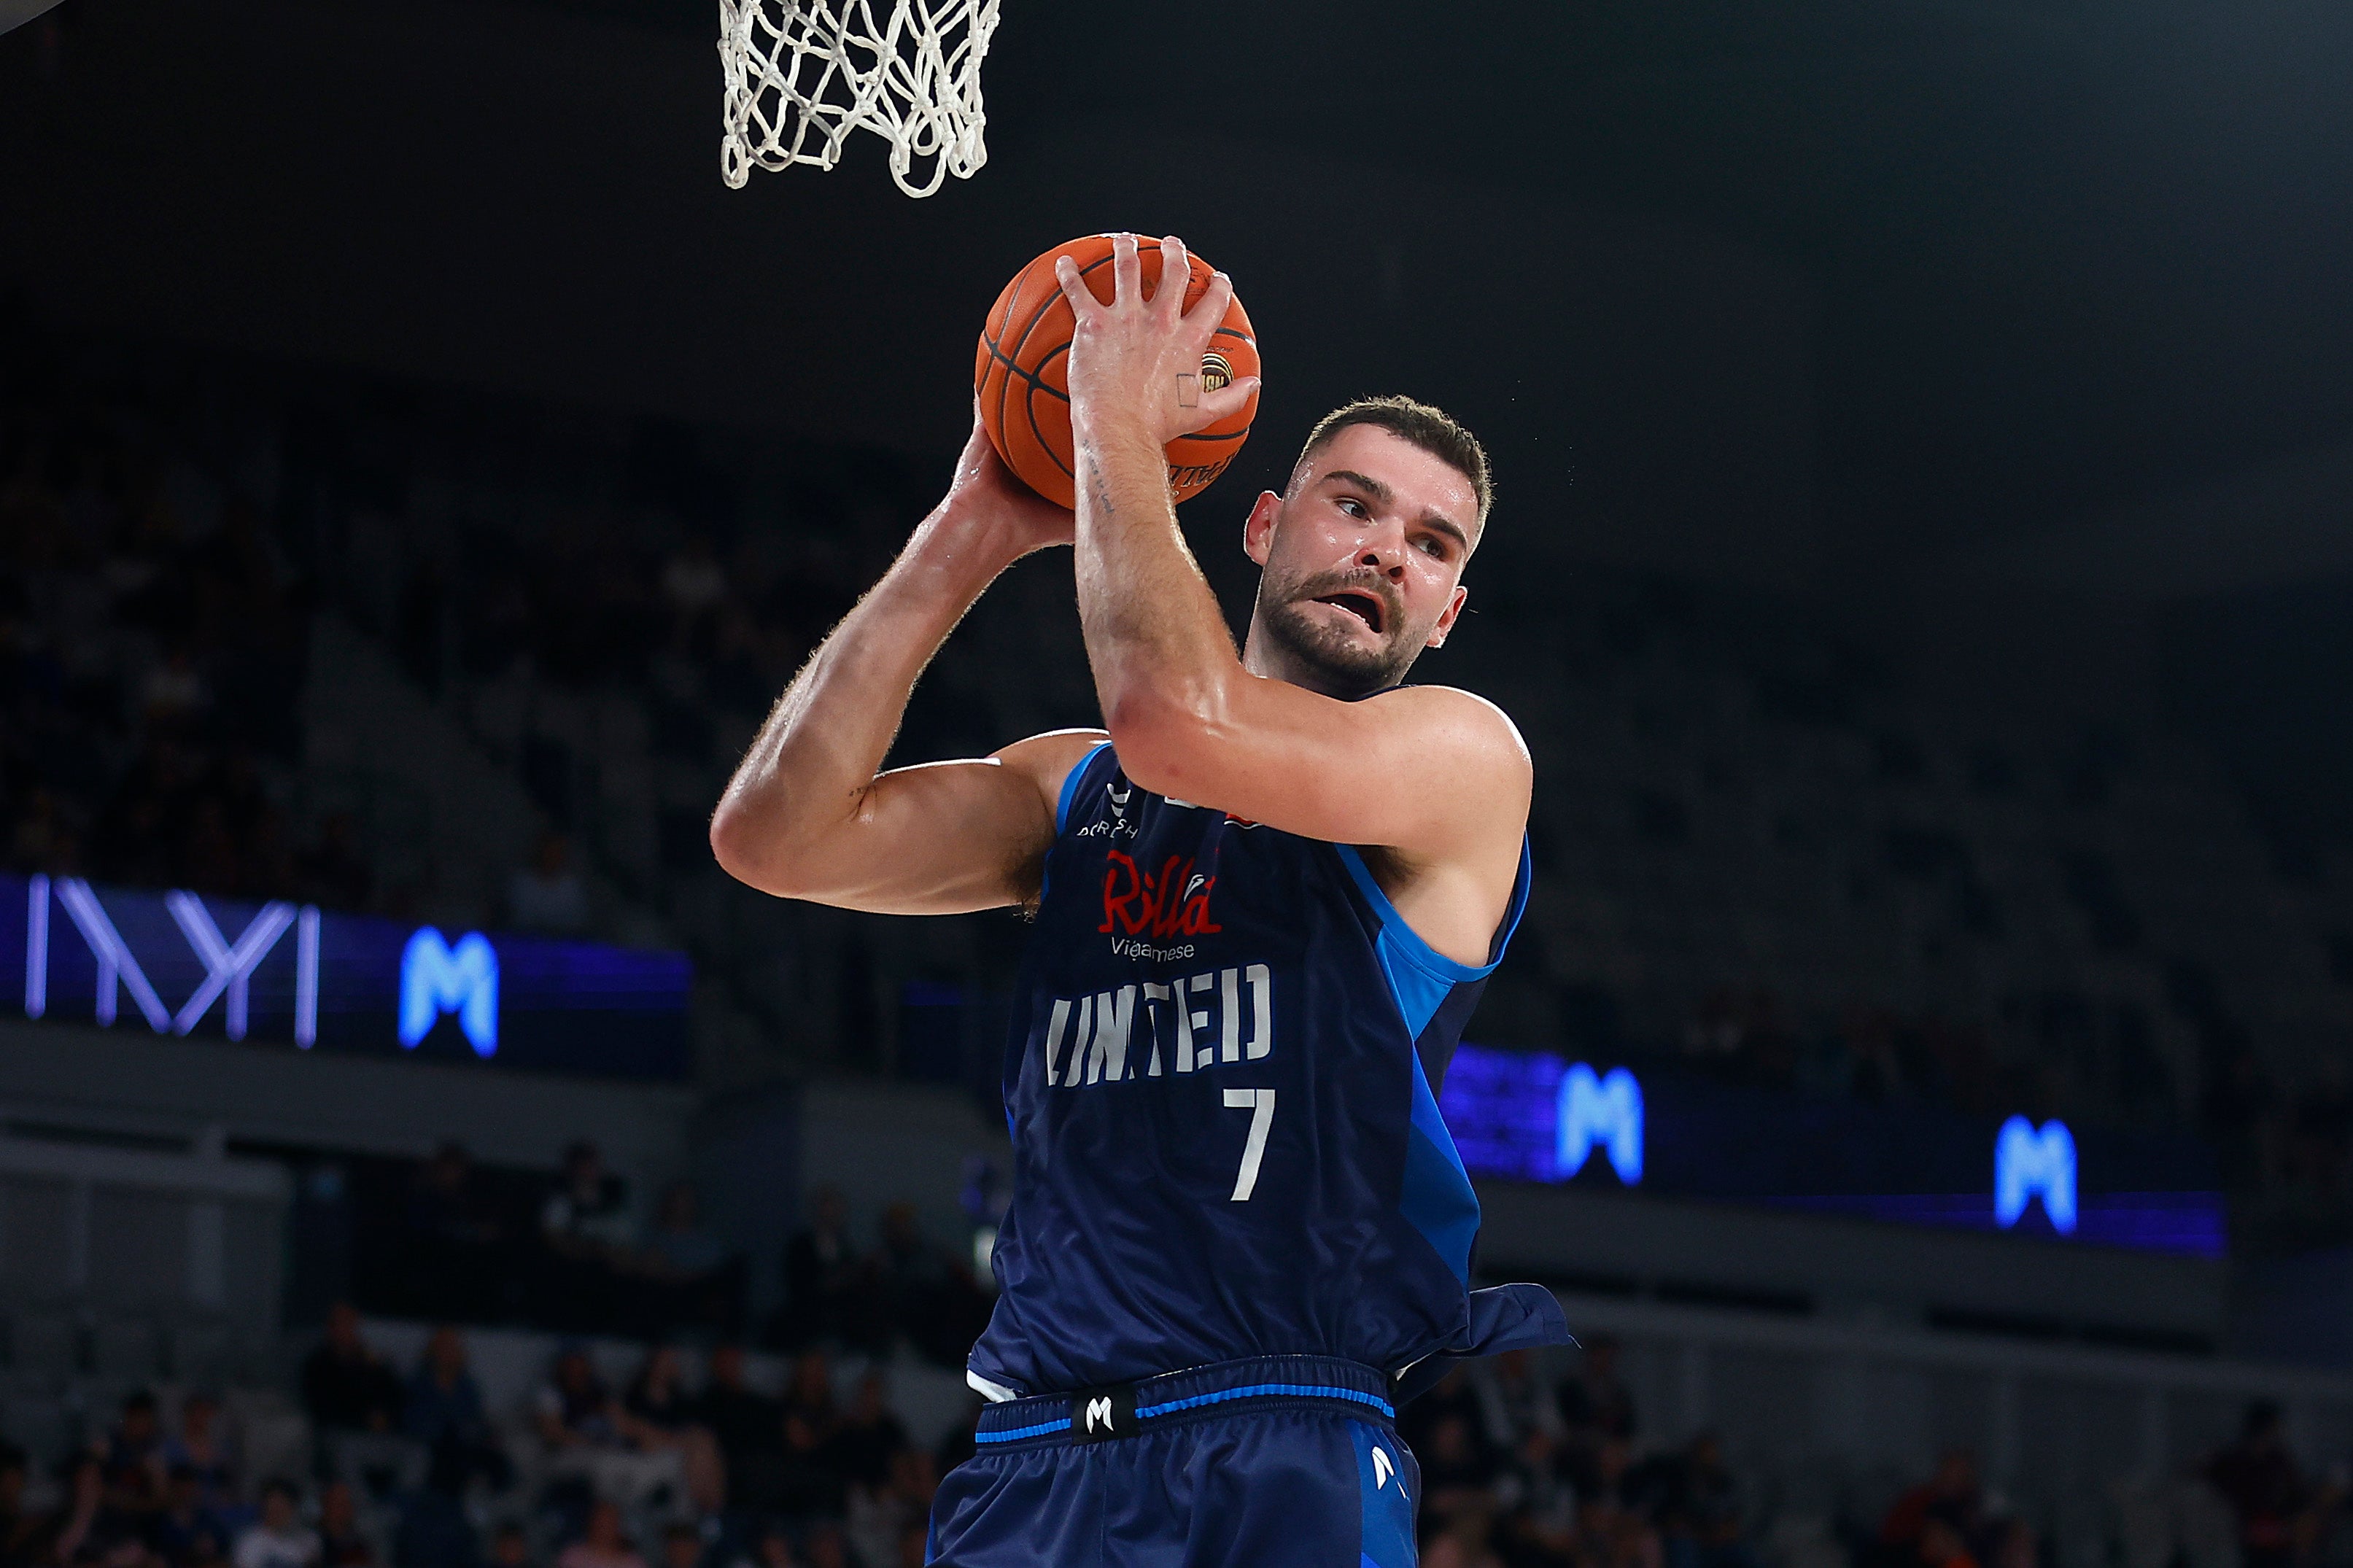 Australian basketballer Isaac Humphries comes out as gay The Independent